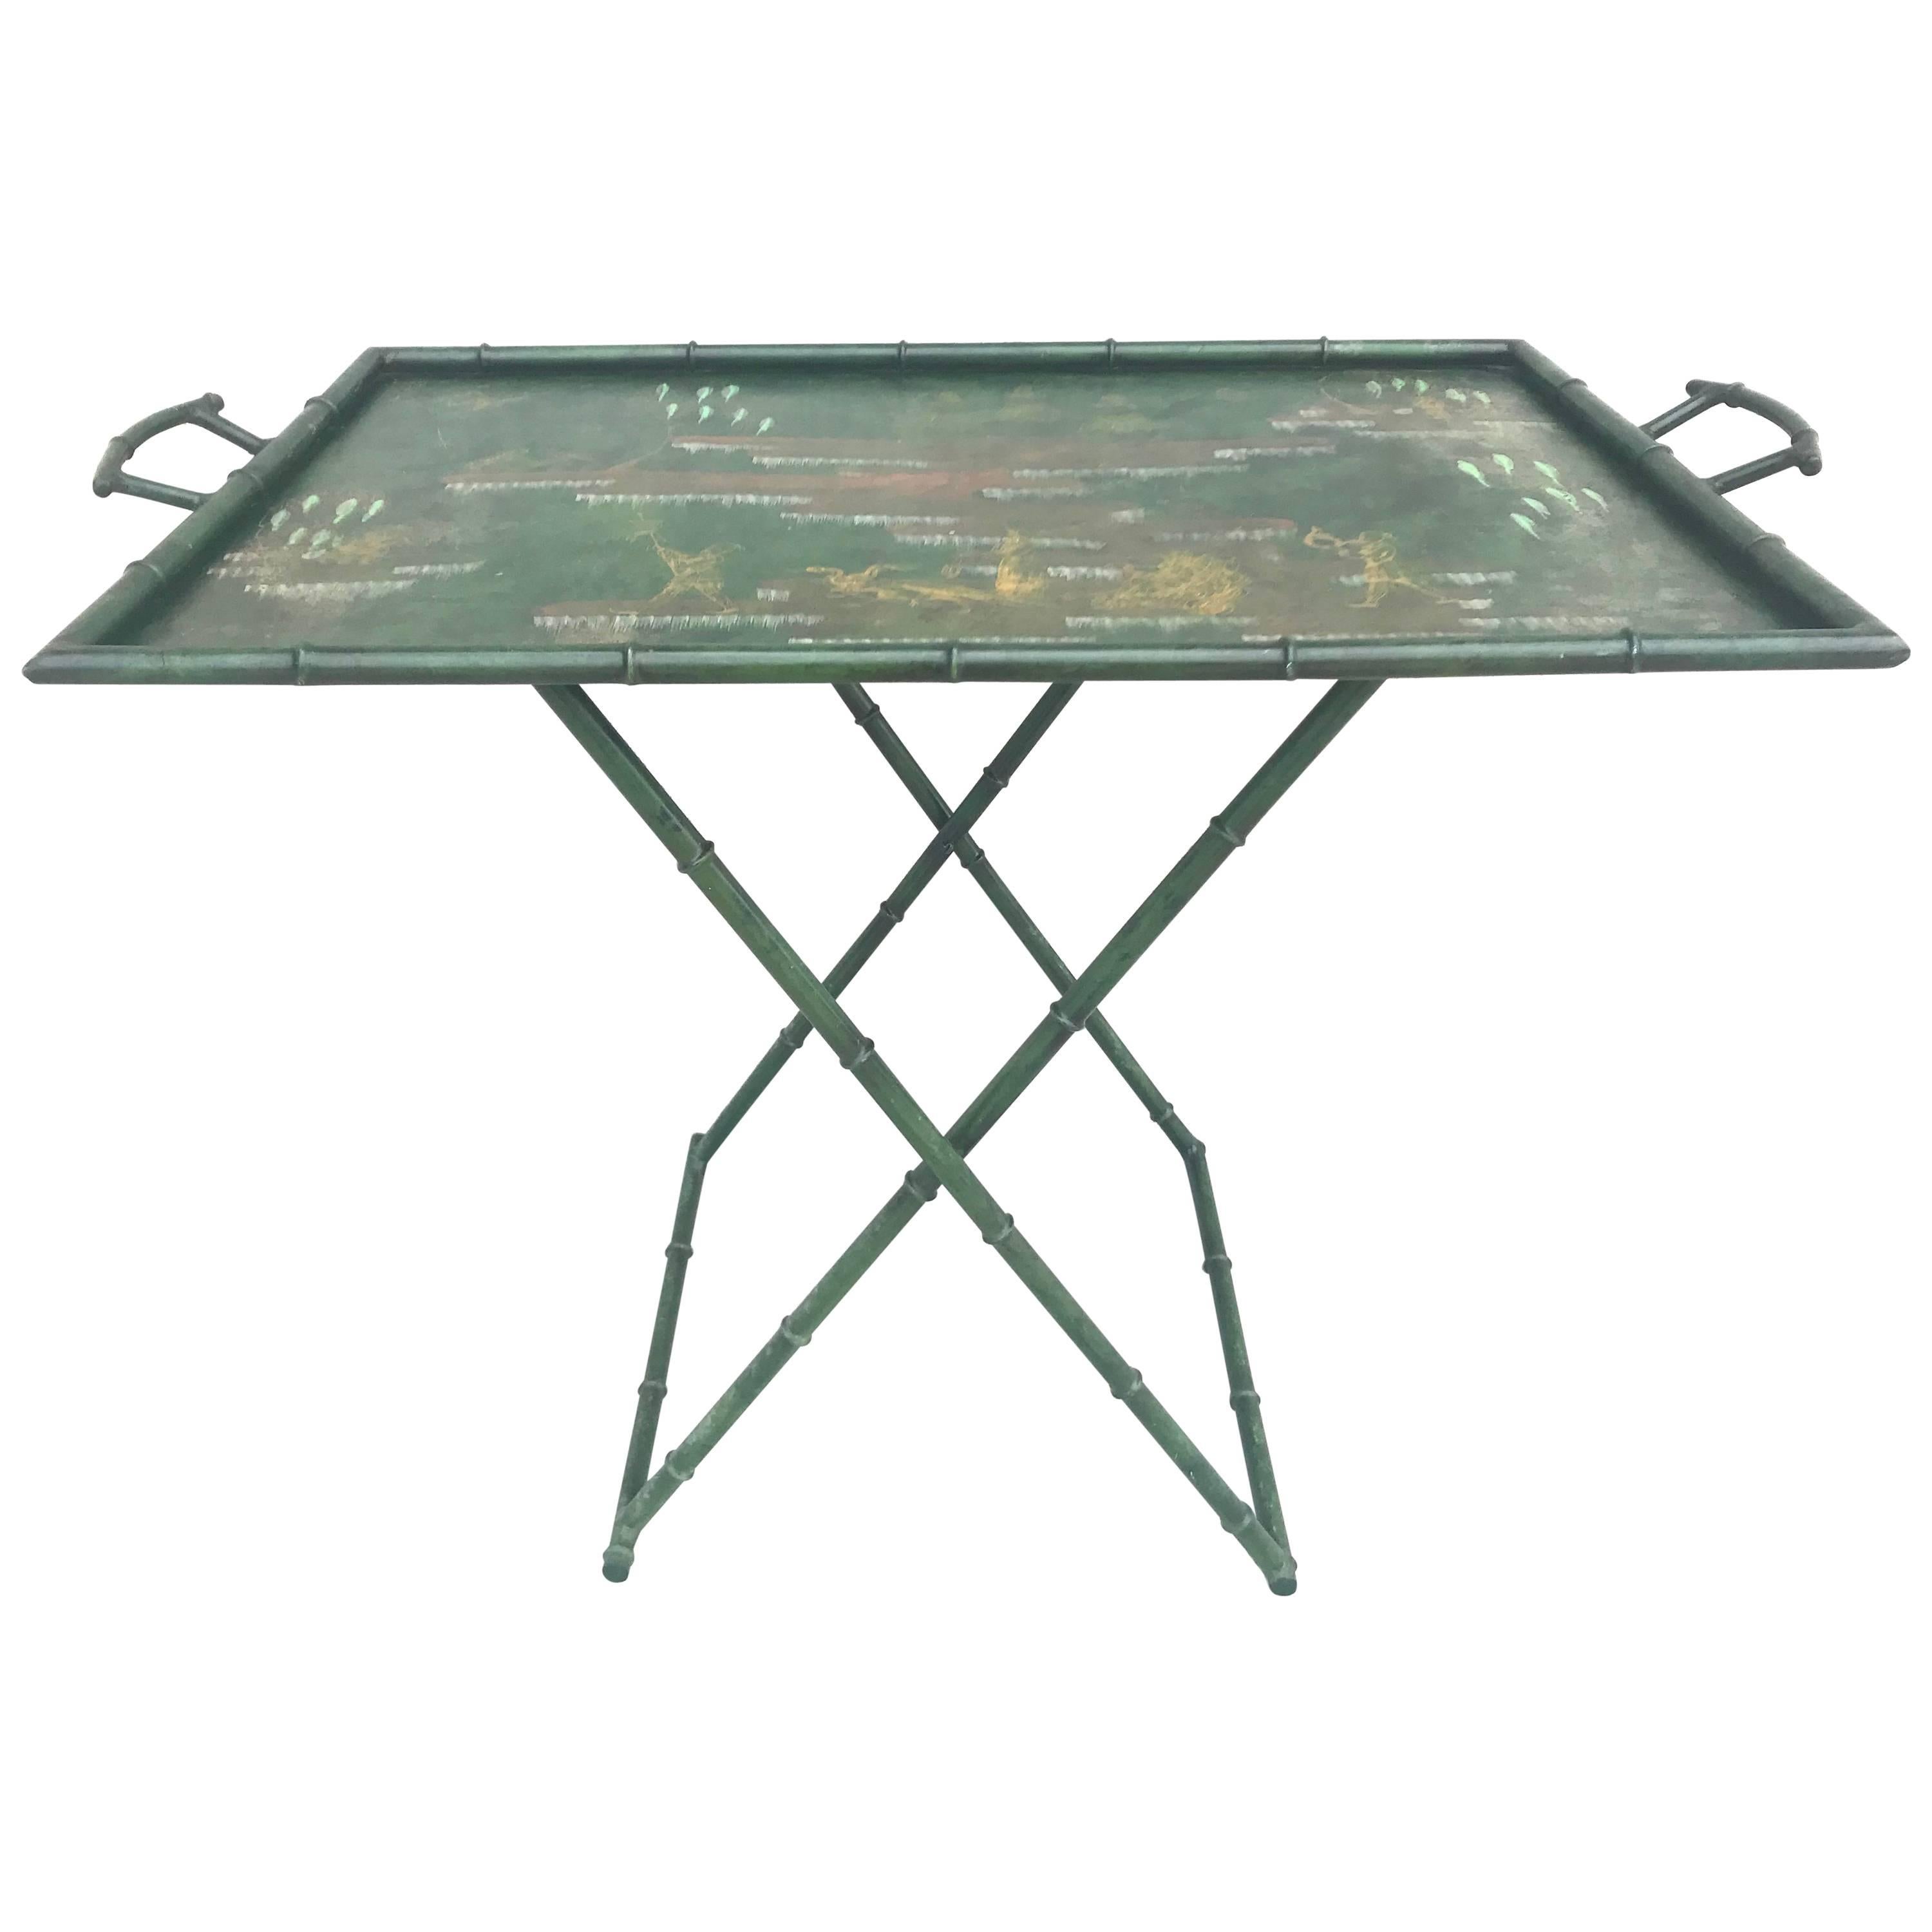 Fabulous 1950s Italian Chinoiserie Tole Faux Bamboo Tray on Stand For Sale